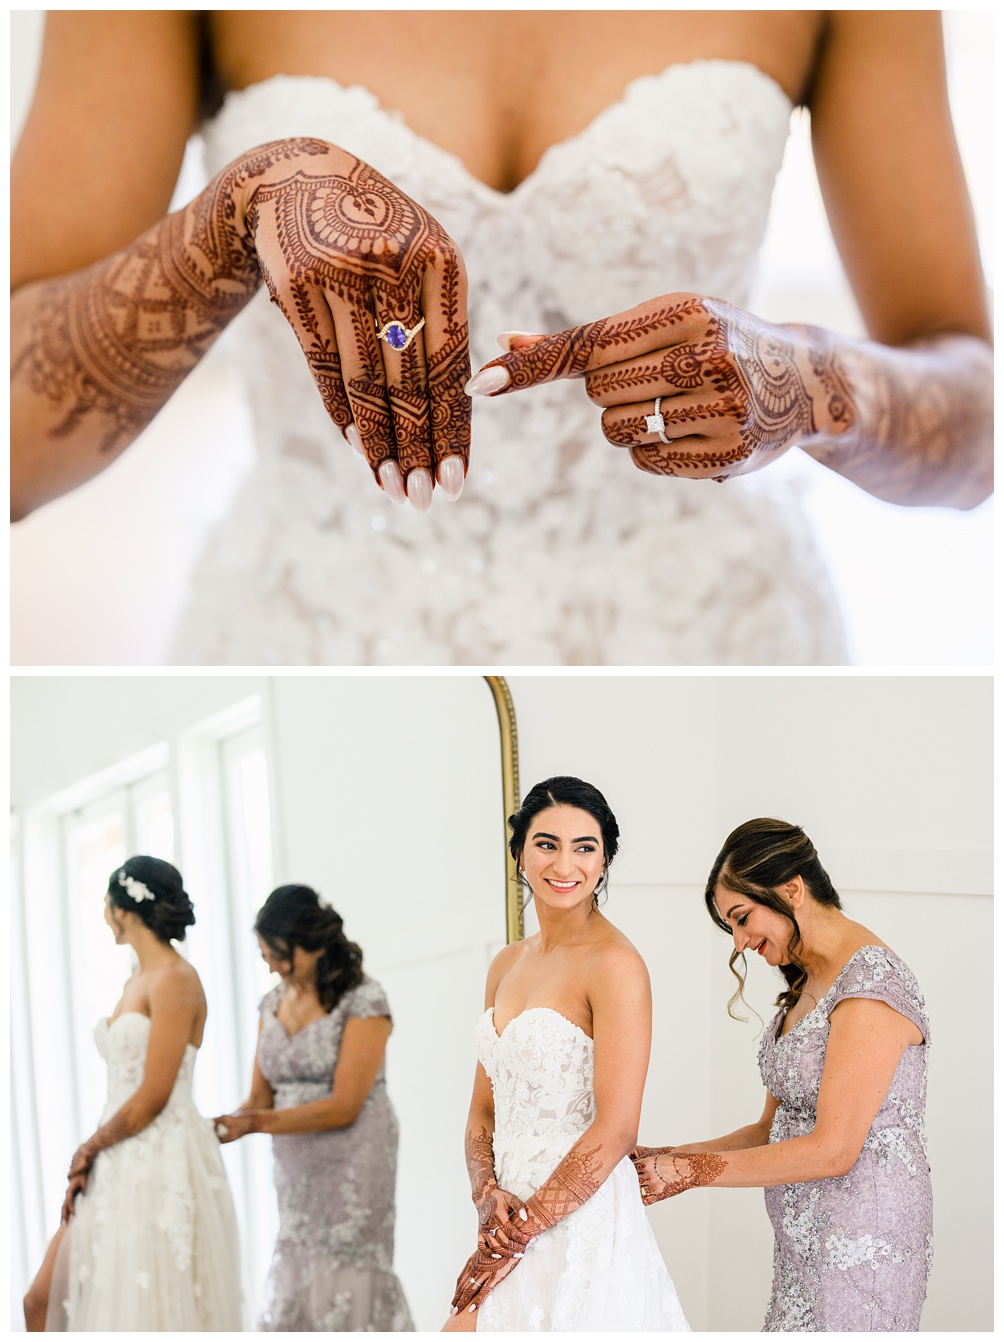 Bride points to husband's name on her hands in henna